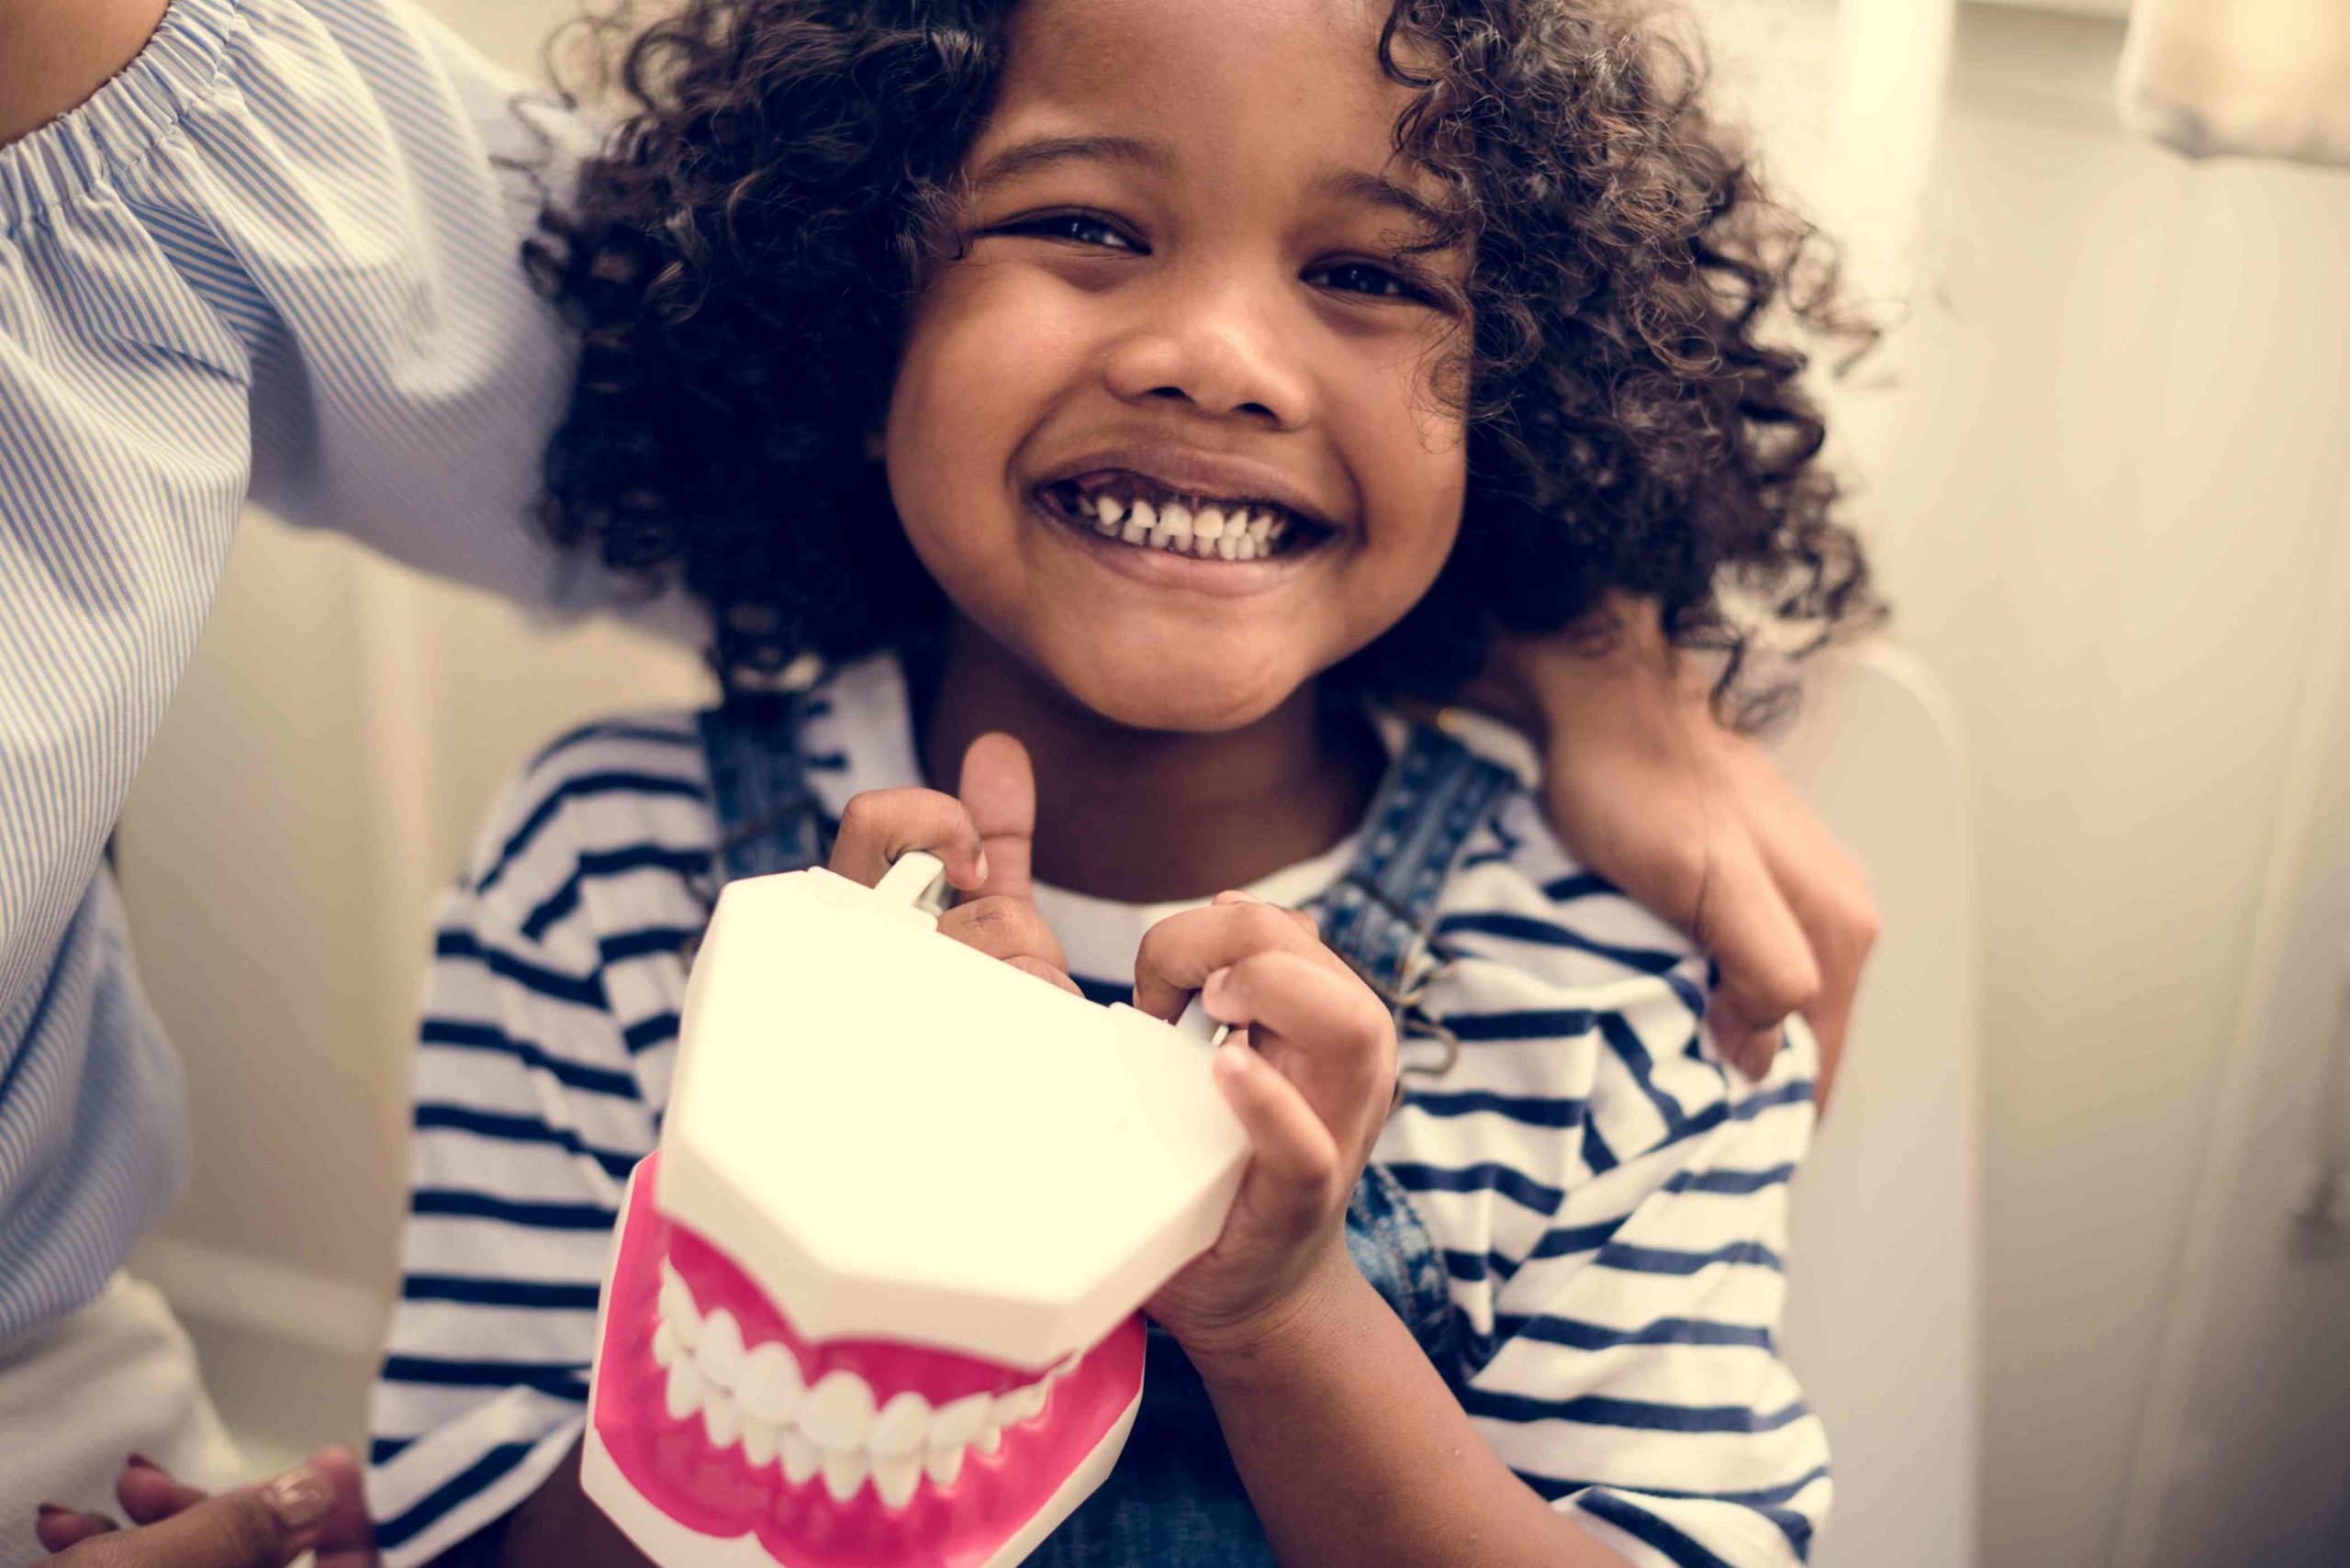 our dentist offer a friendly environment for dentistry for children